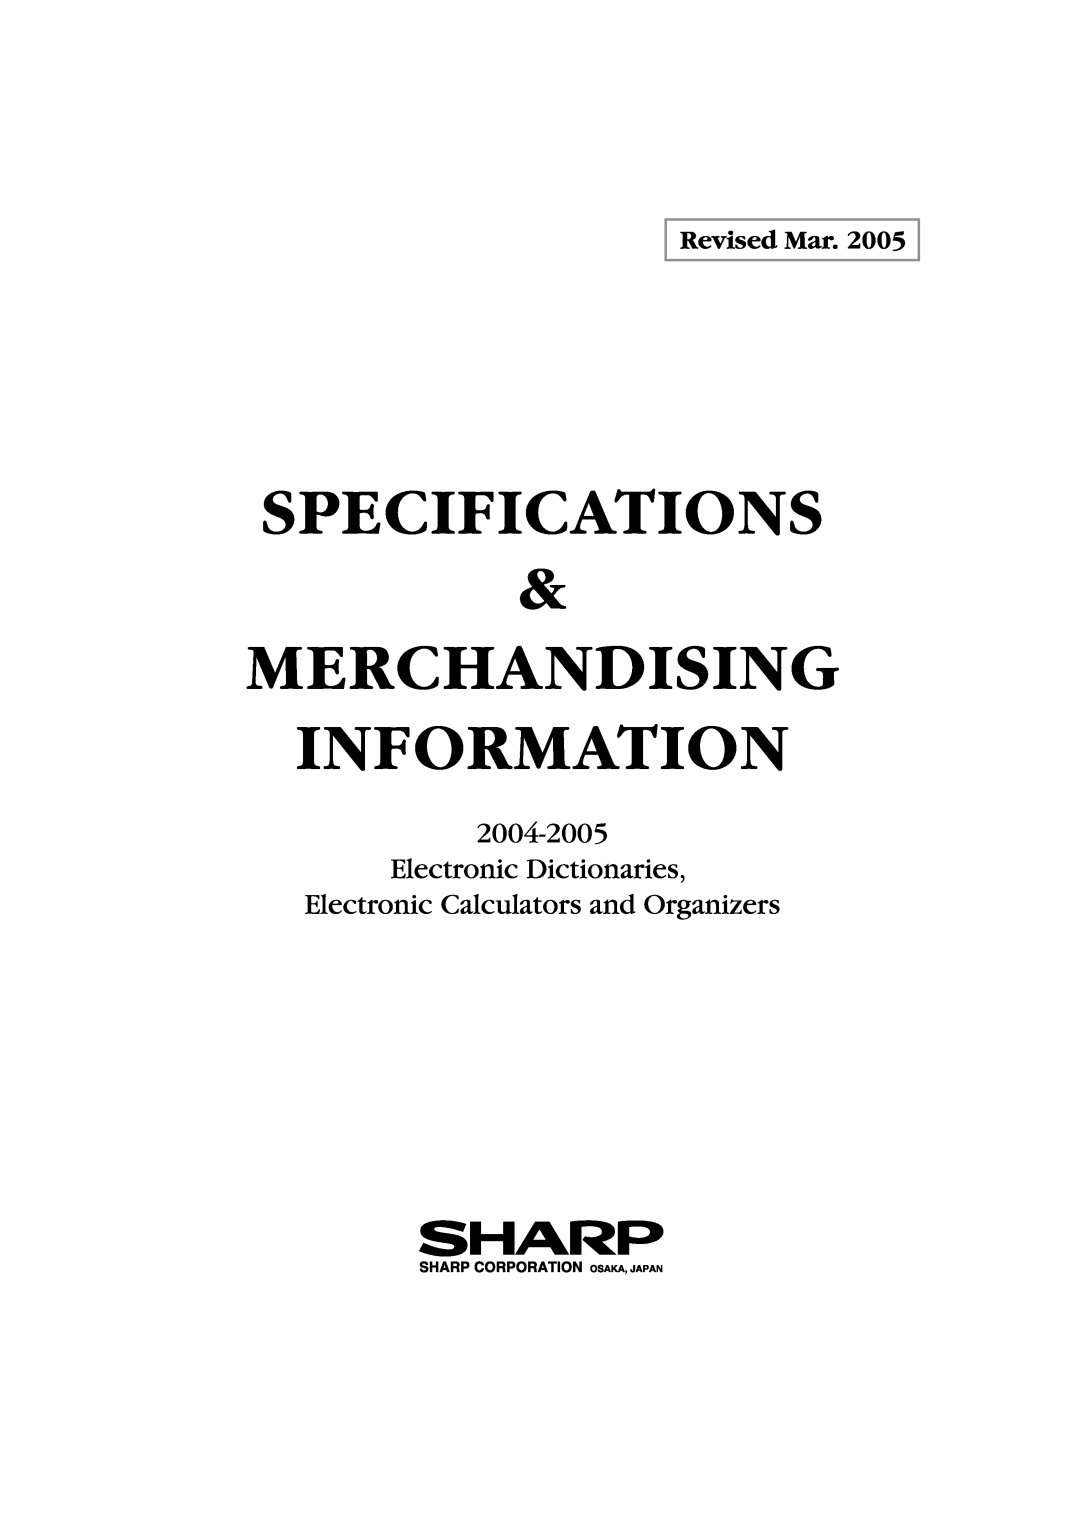 Sharp electronic calculator manual Specifications, Merchandising Information, Electronic Dictionaries, Revised Mar 